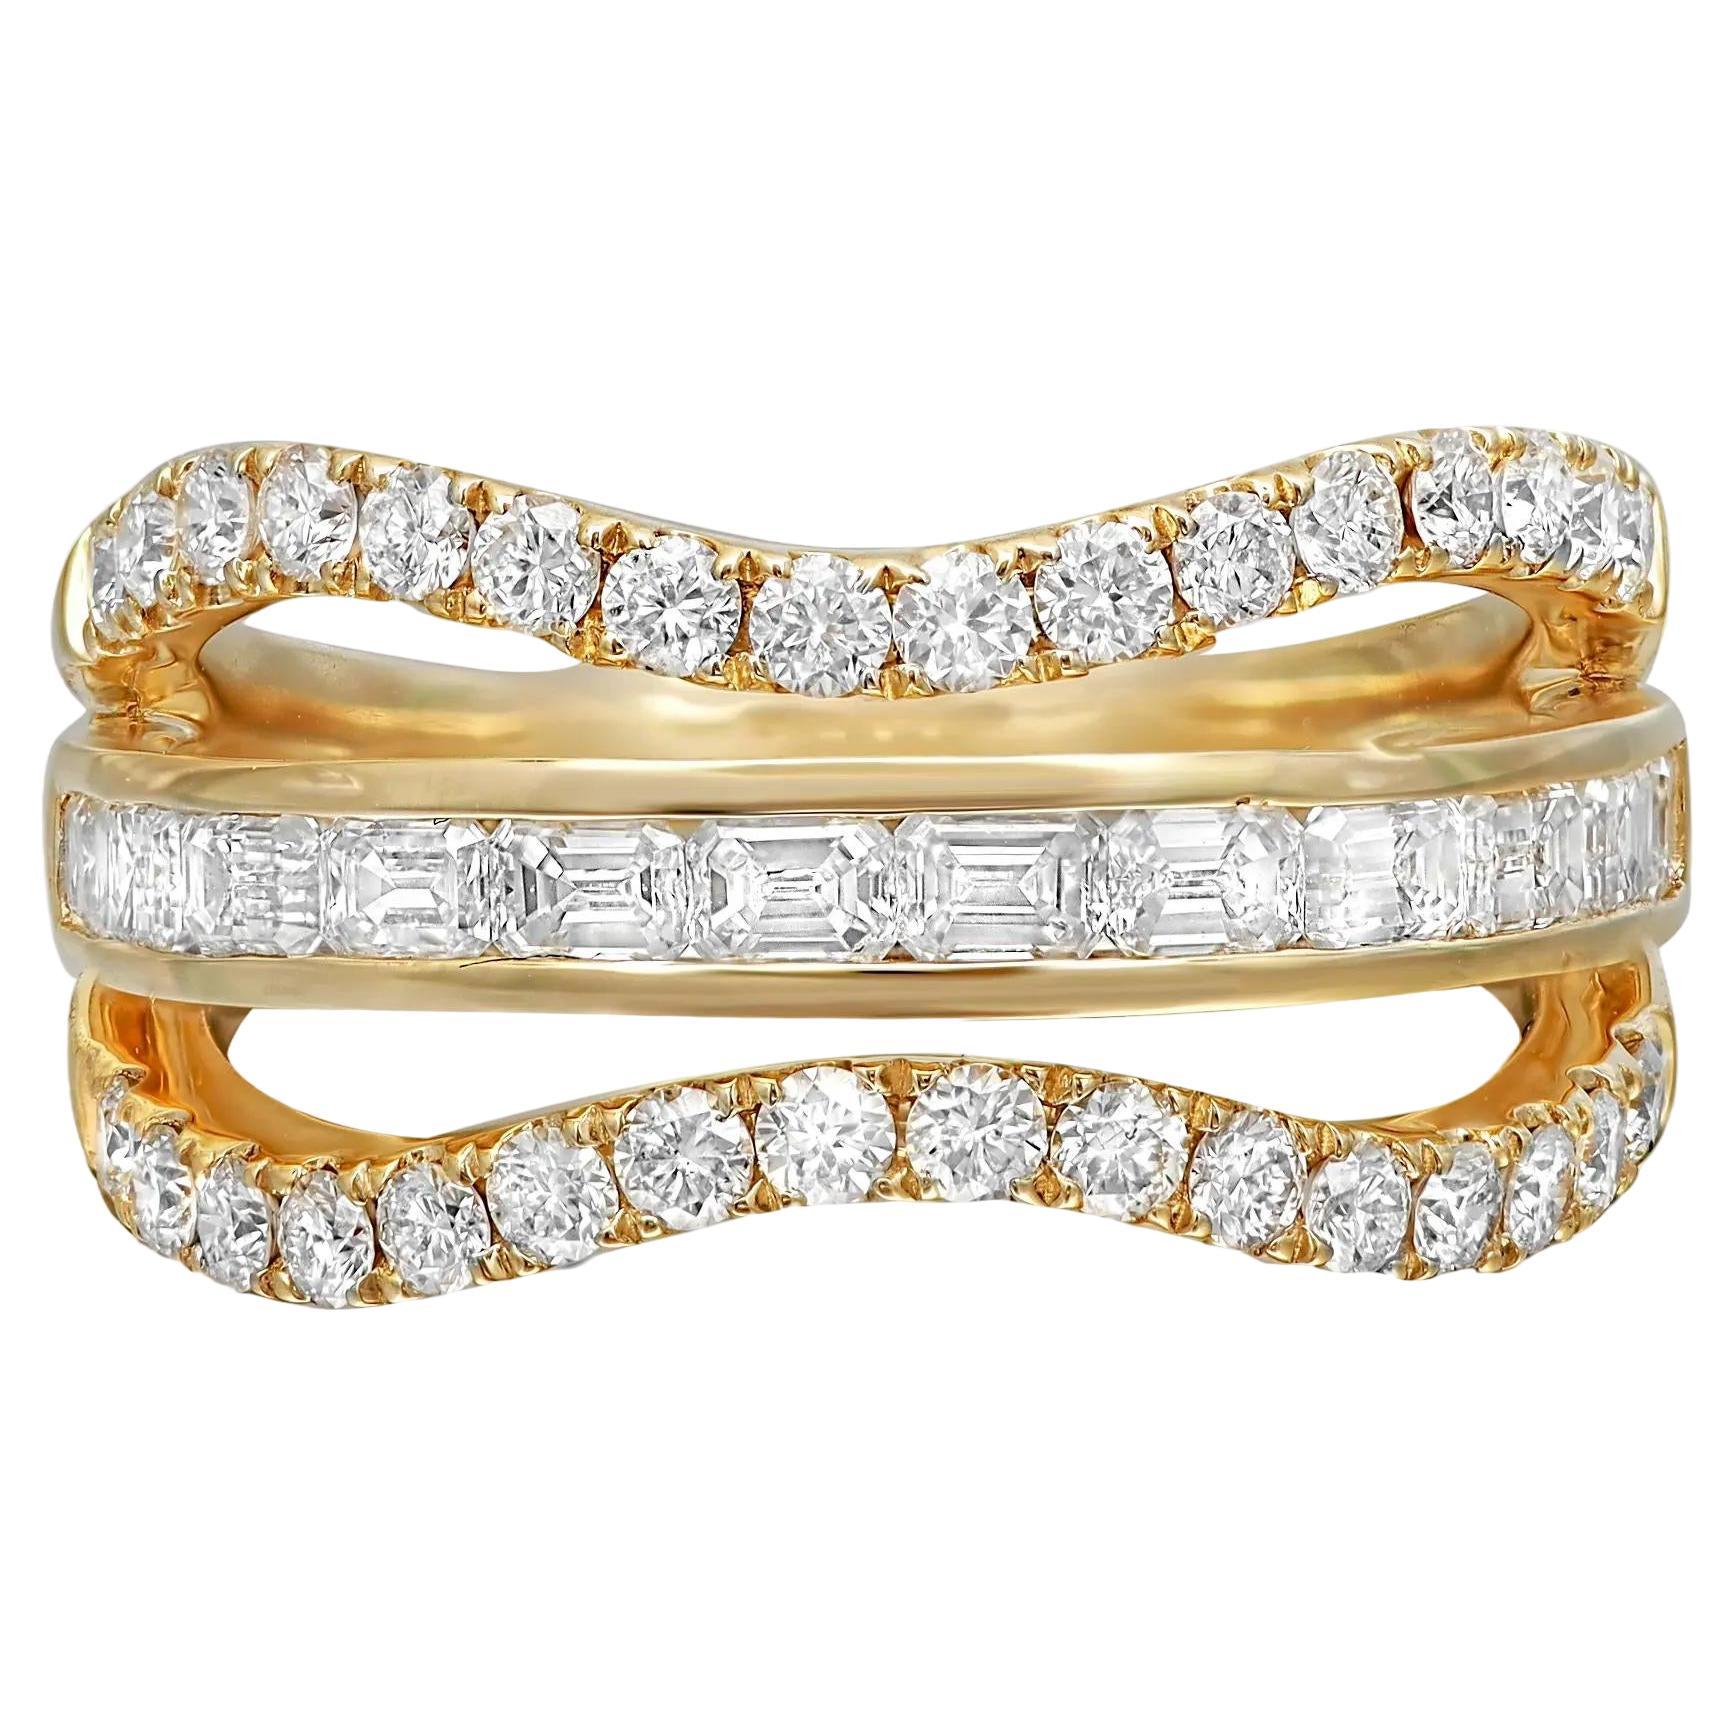 Emerald Cut & Round Cut Diamond Band Ring 18K Yellow Gold 1.62Cttw Size 6.5 For Sale